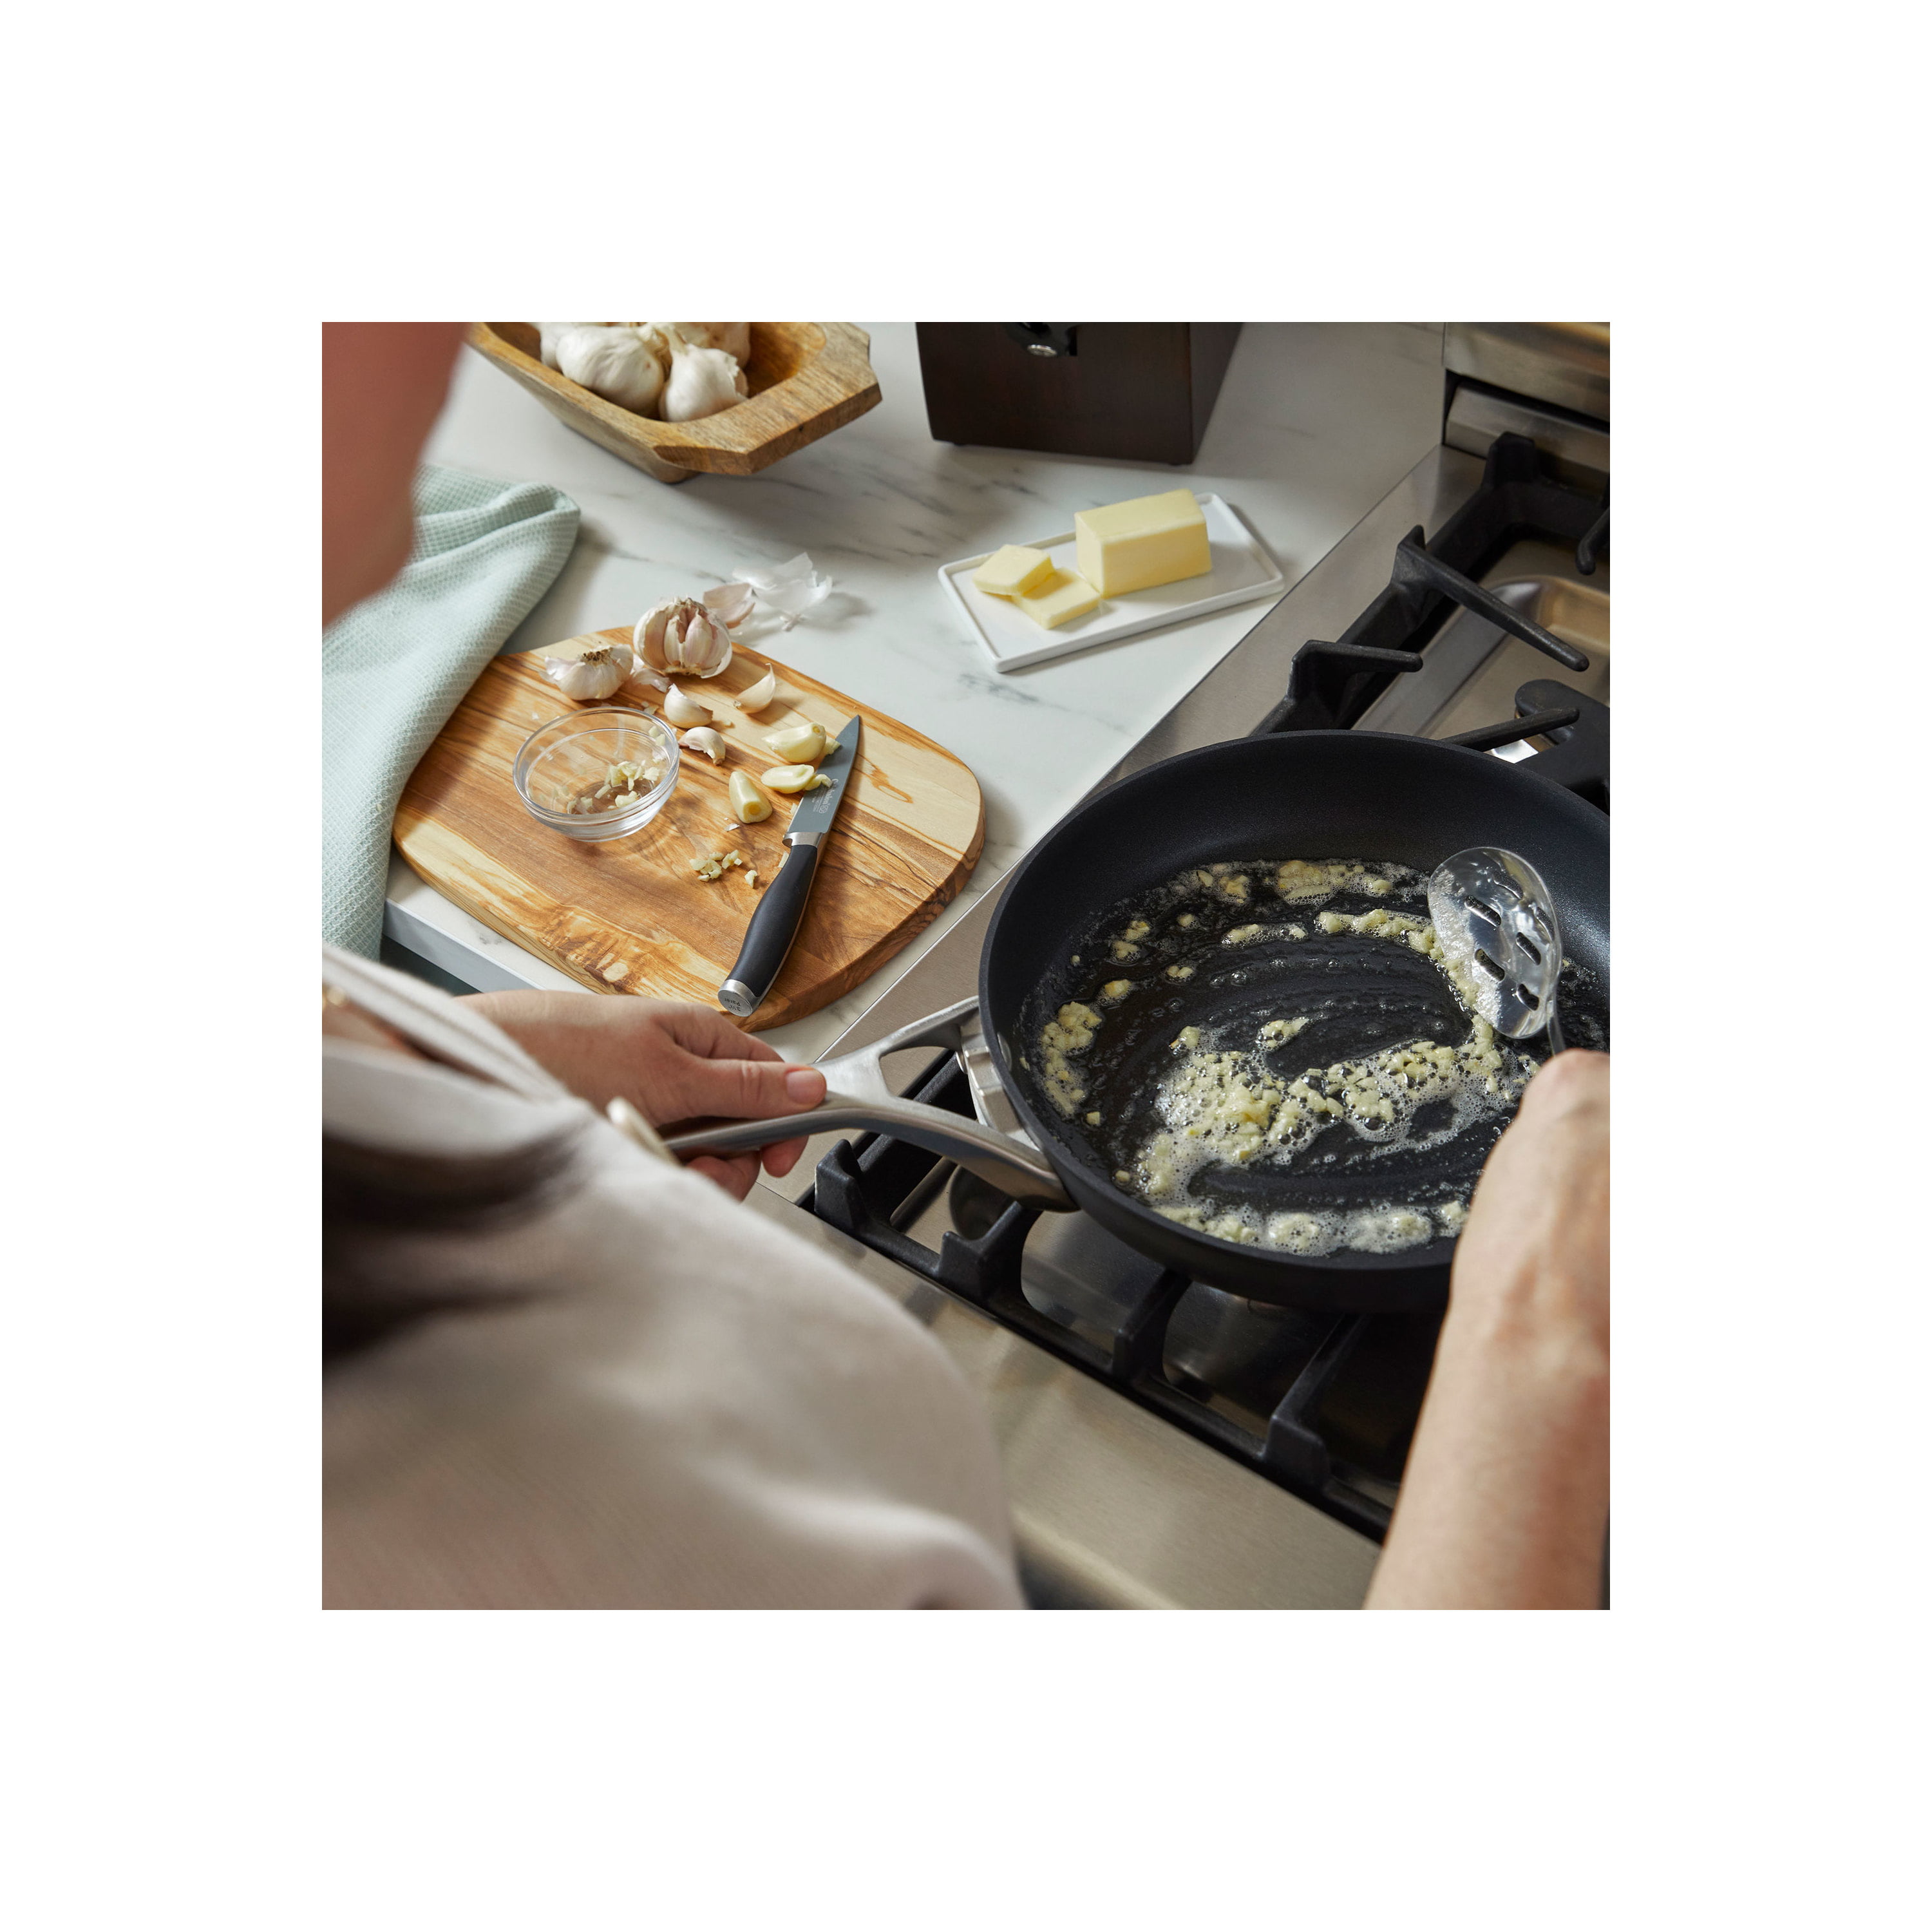 Calphalon Premier Space-Saving 12 MineralShield Non-Stick Everyday Pan  with Lid + Reviews